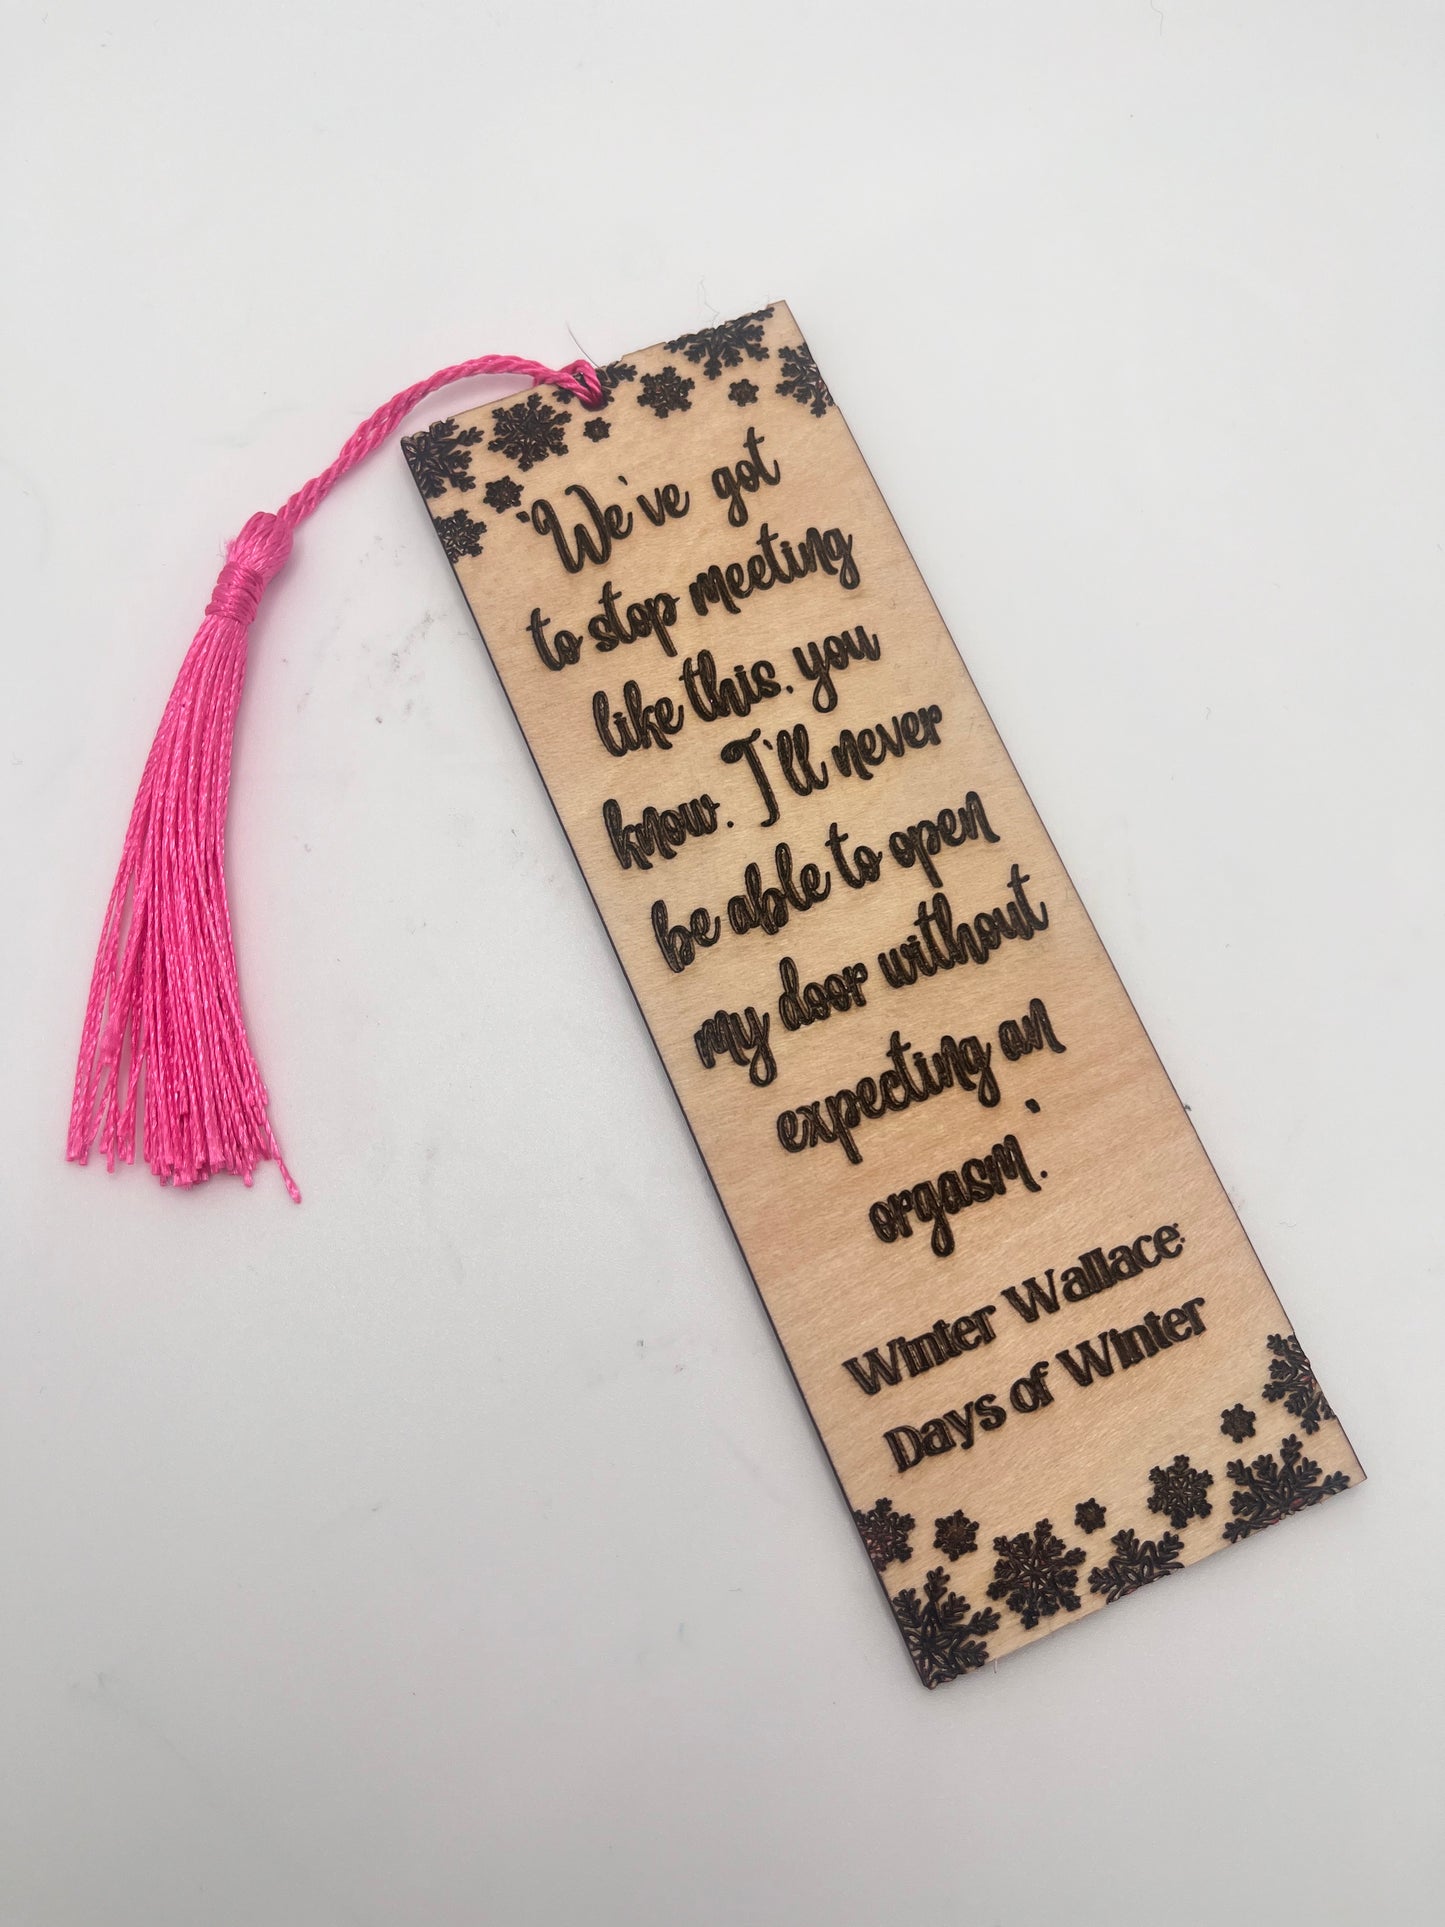 Days of Winter Wooden Bookmarks